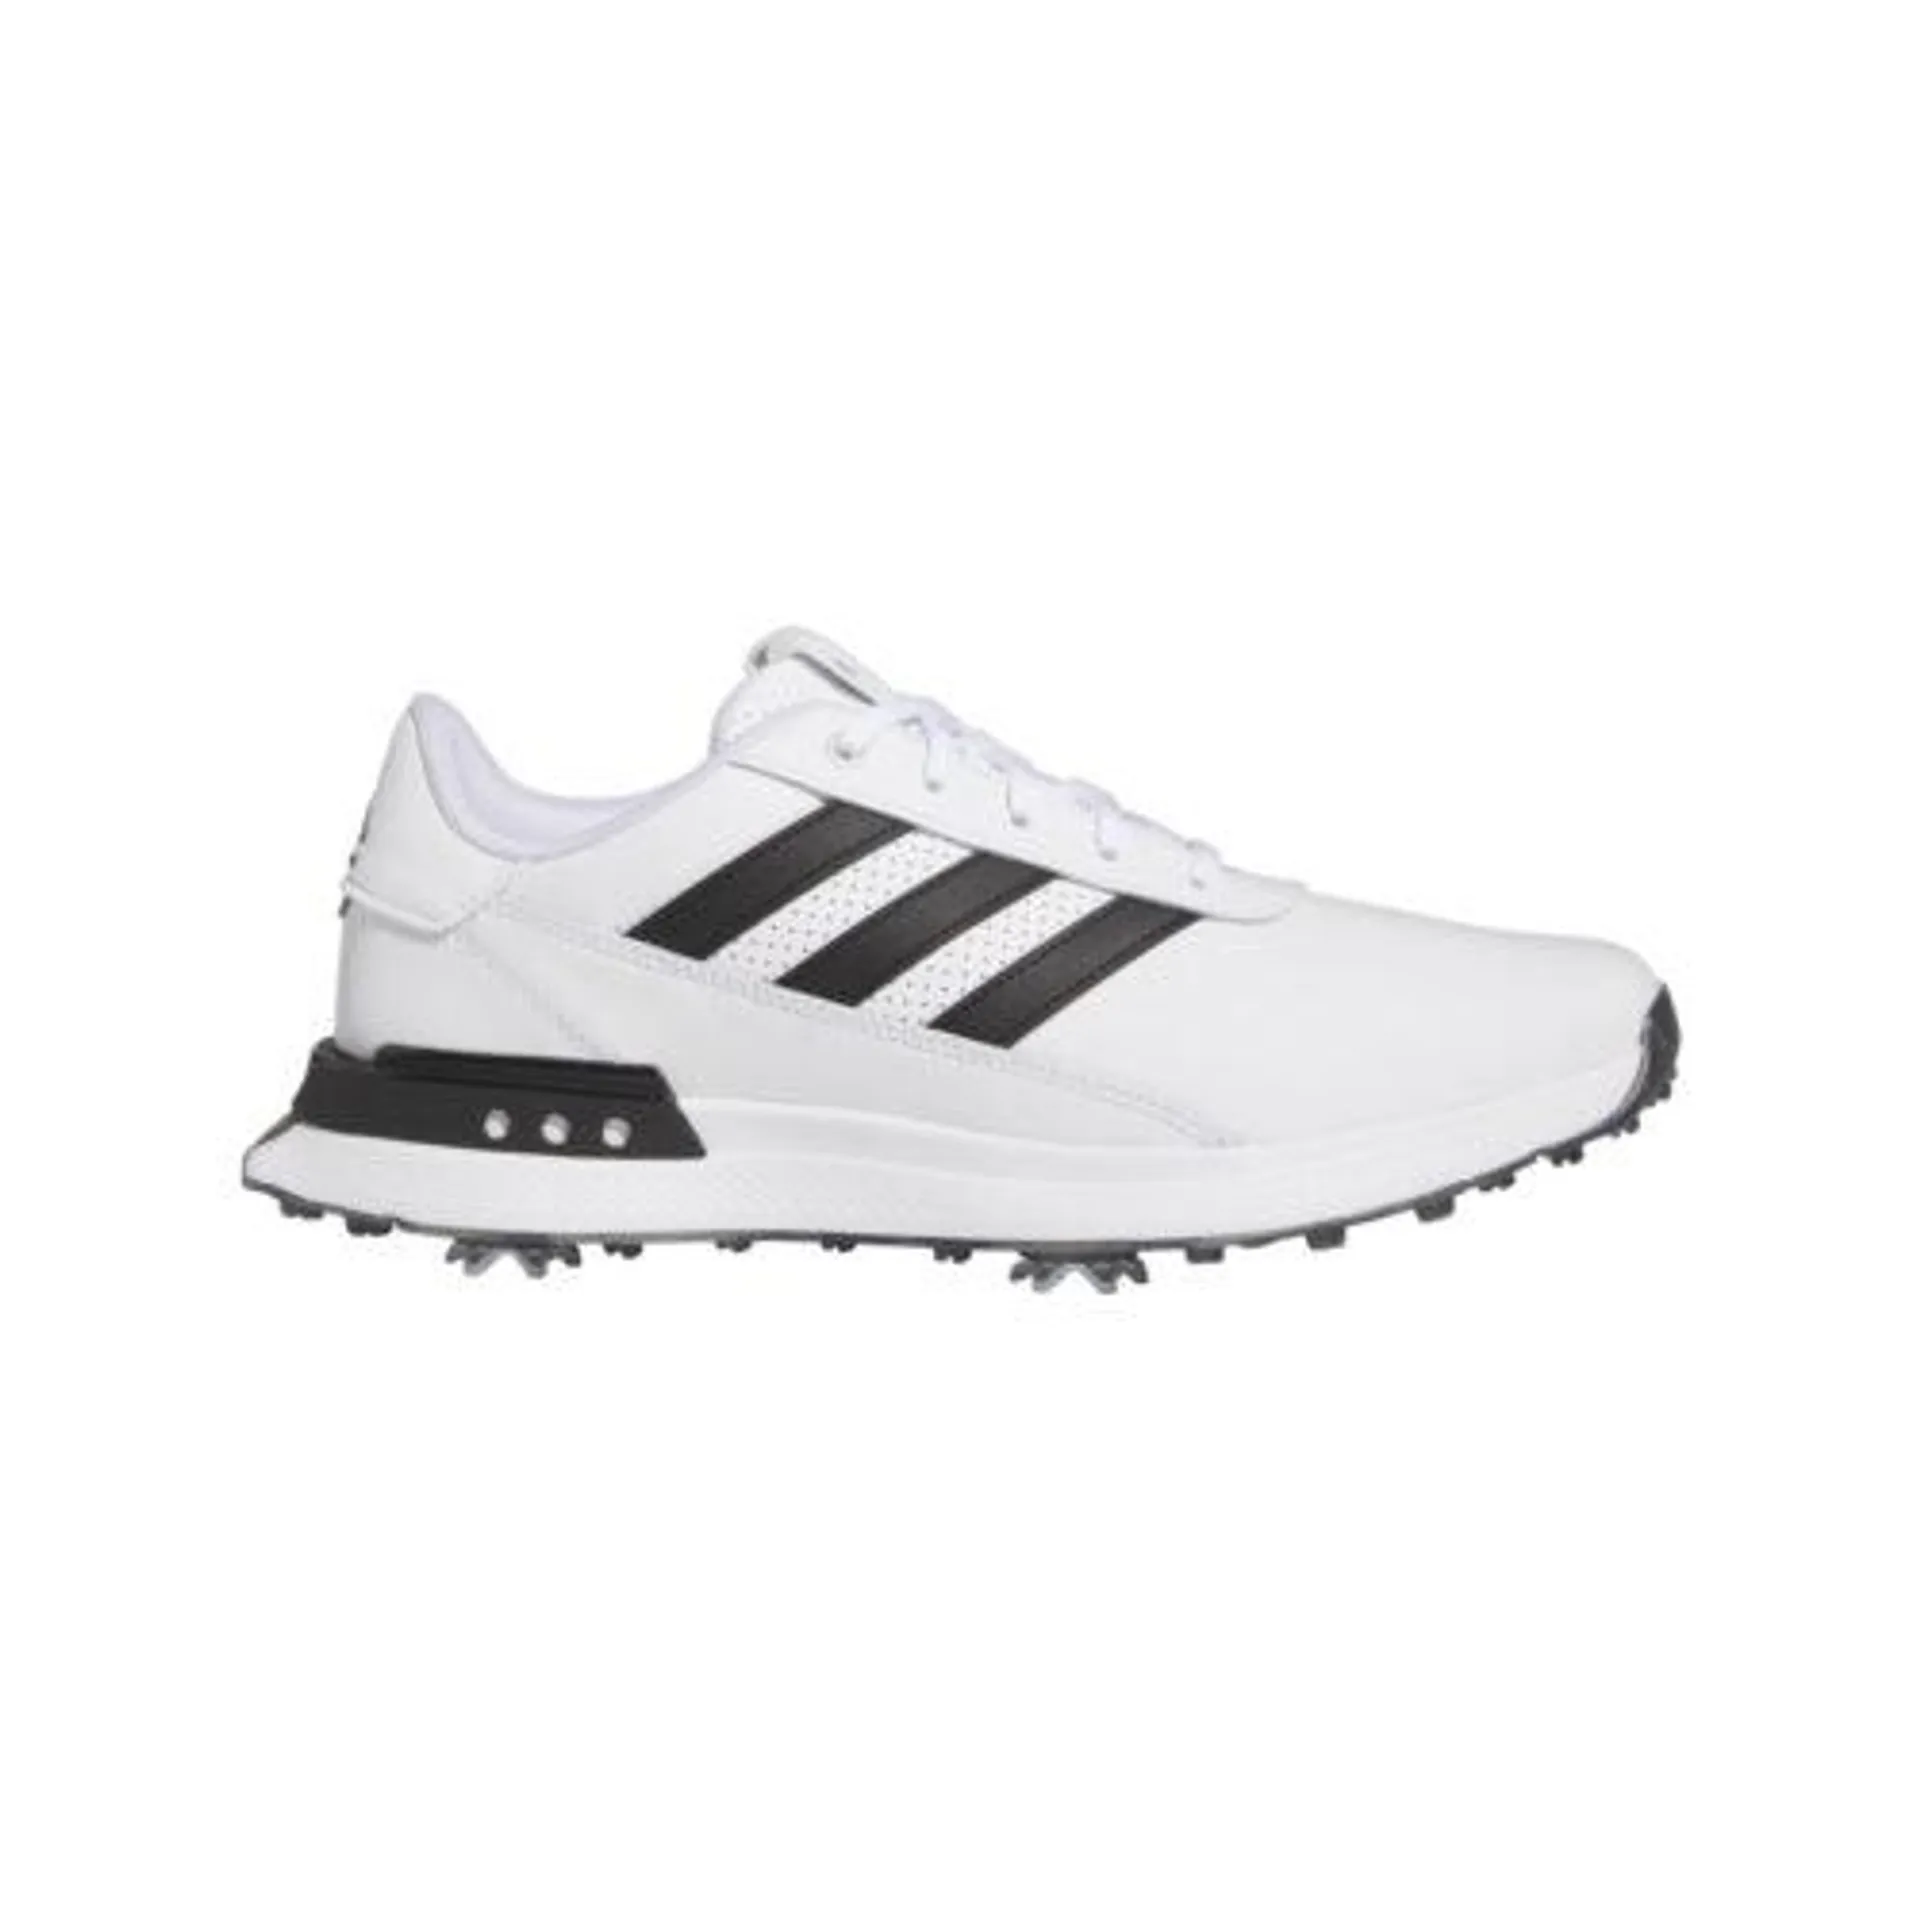 adidas S2G SL Golf shoes – White IF0292